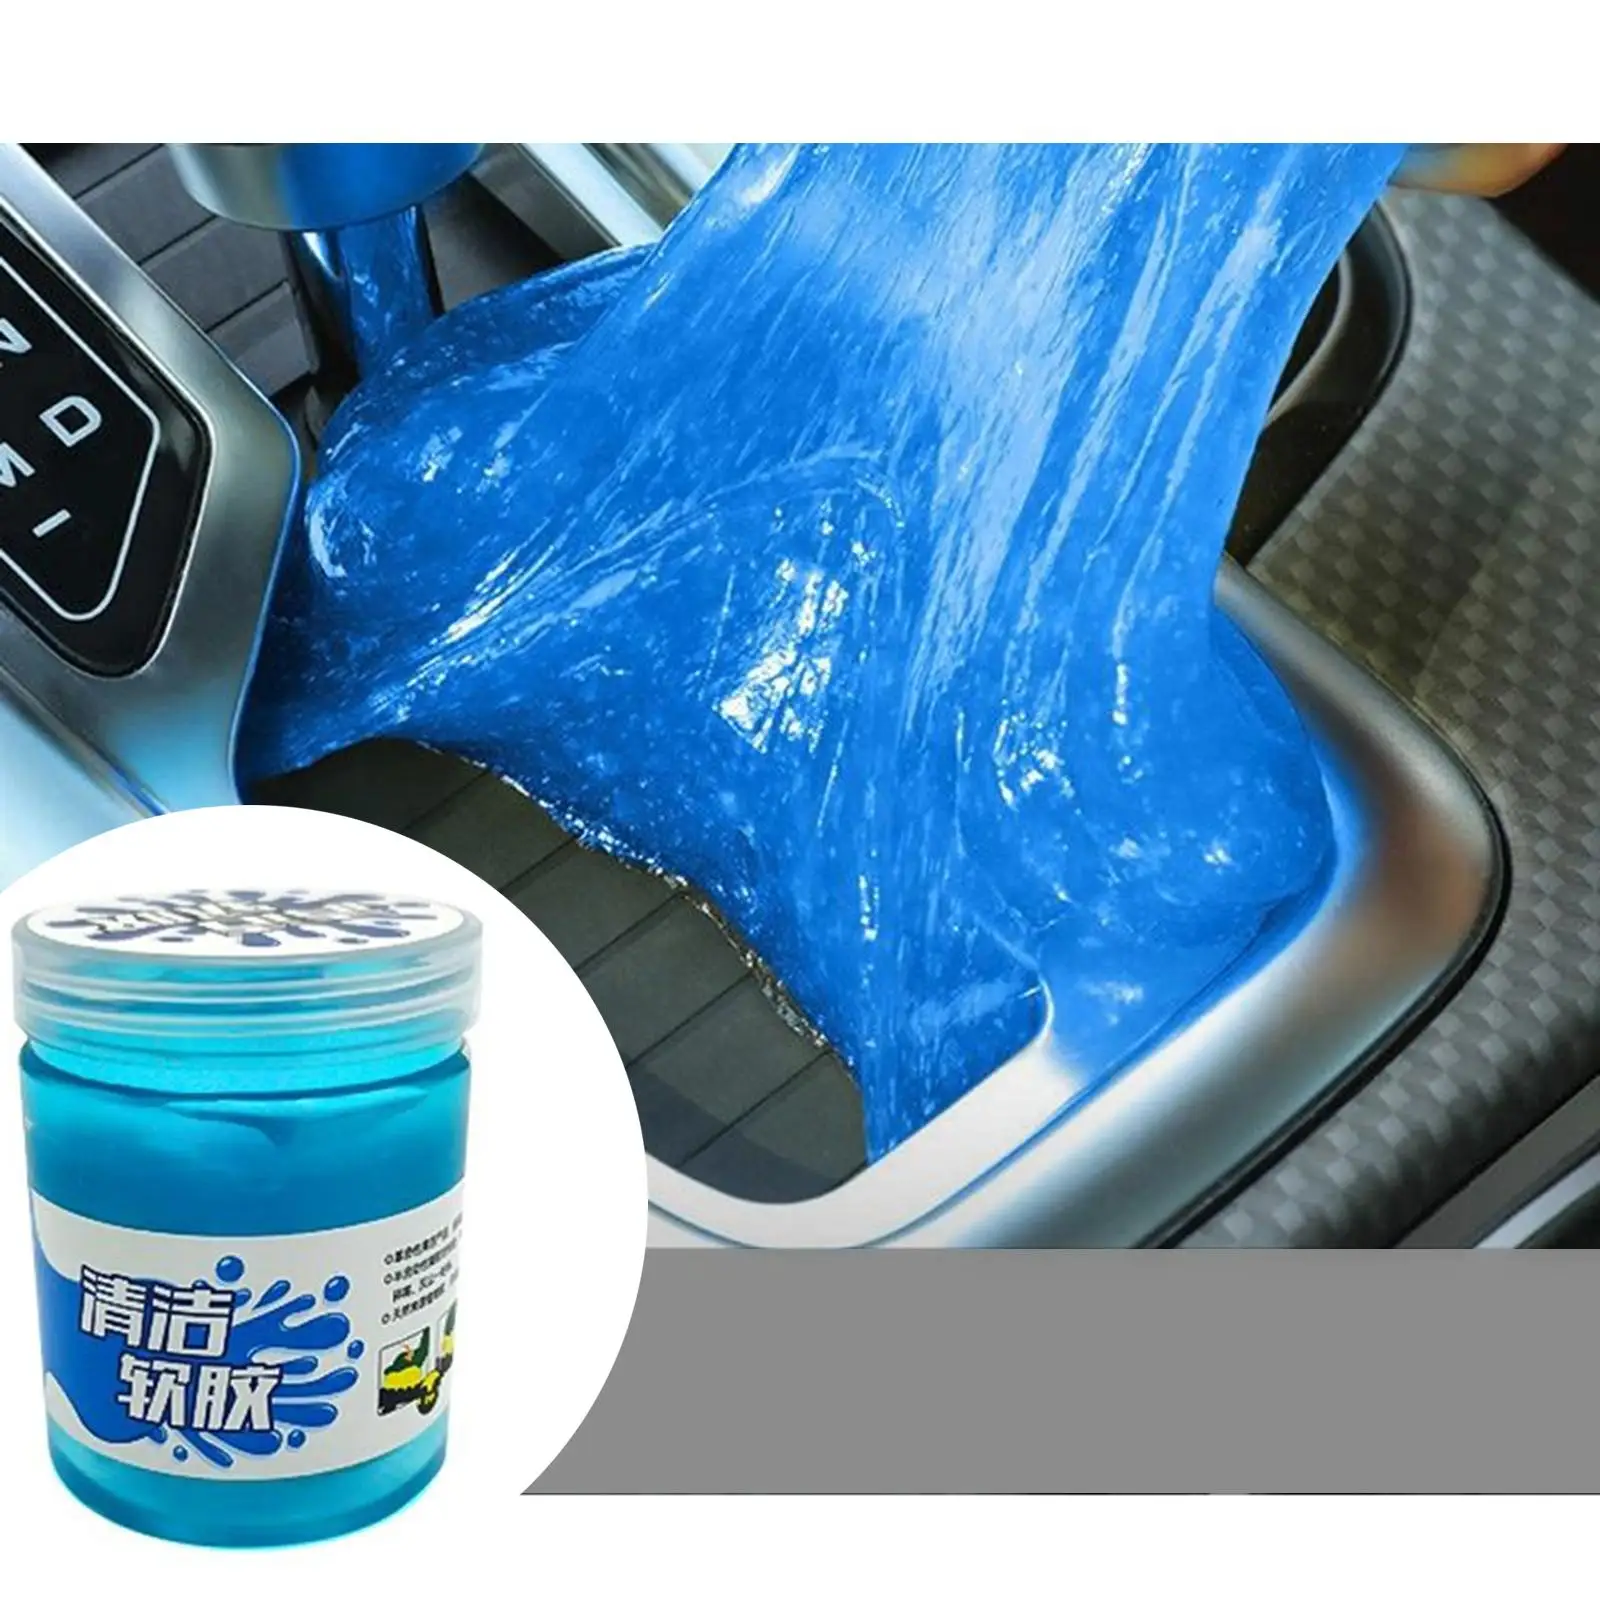 Universal Dust Cleaner Cleaning Gel for Car, Laptops,, Cameras Cleaning